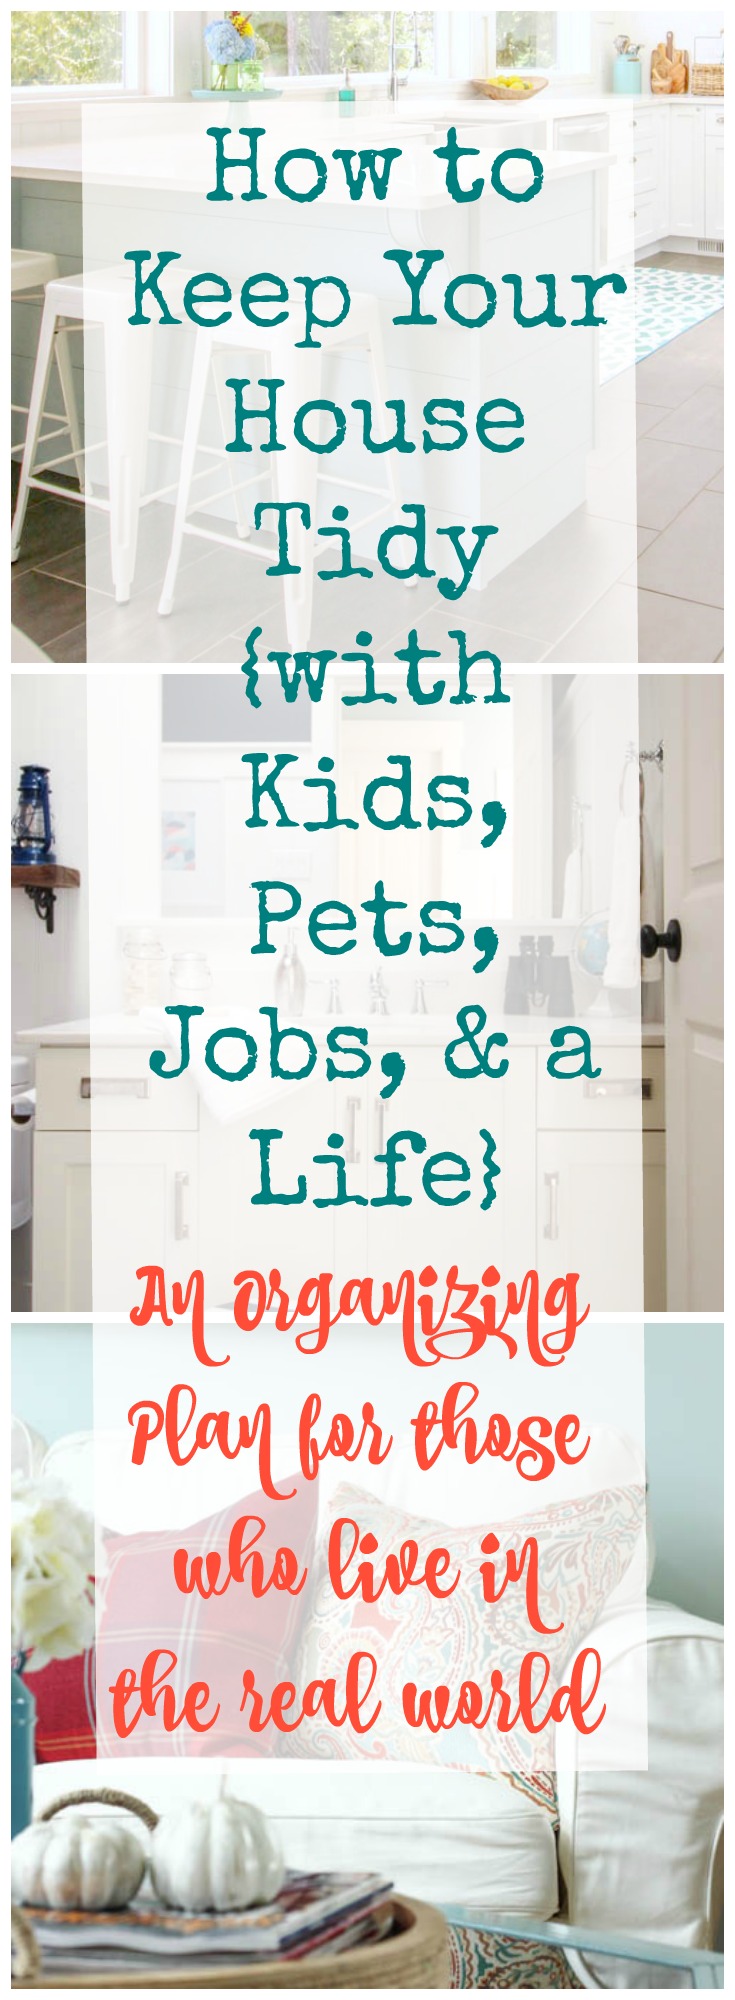 How to keep your house tidy with kids pets jobs and a life - an organizing plan for those who live in the real world